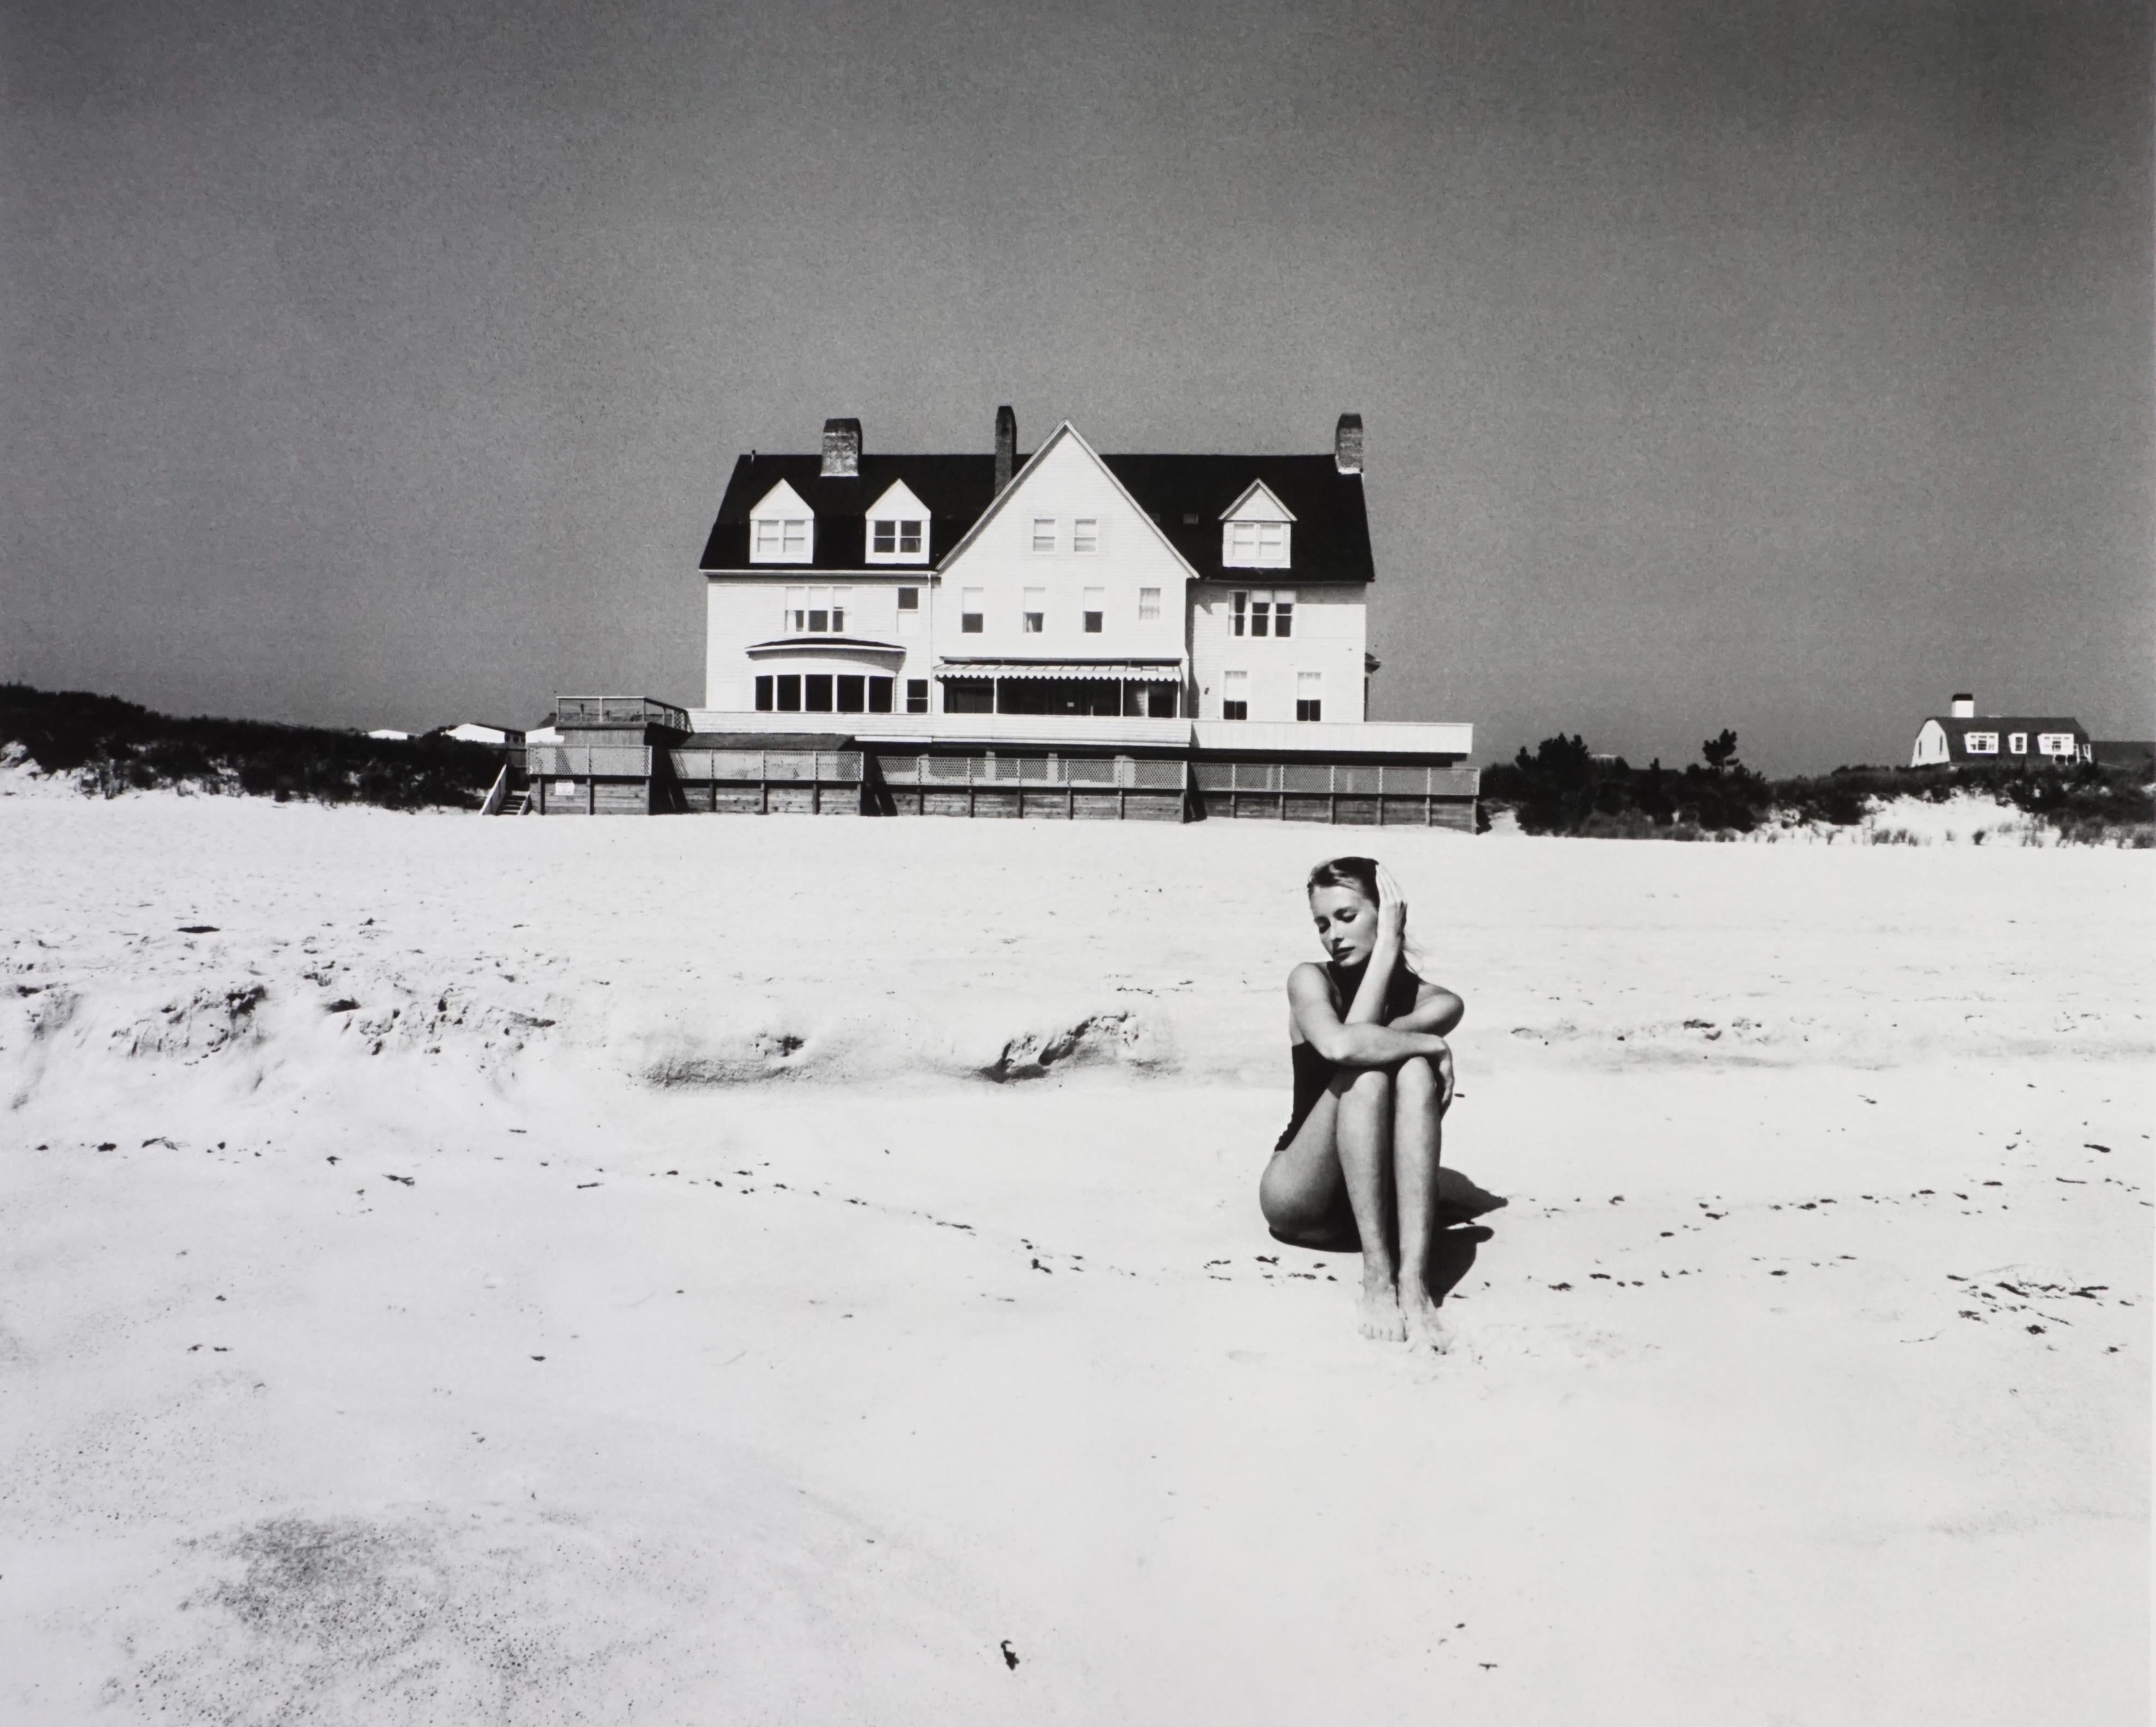 John Swannell Black and White Photograph - Marianne Lah Swannell on the beach, 1983 (Printed 2022)